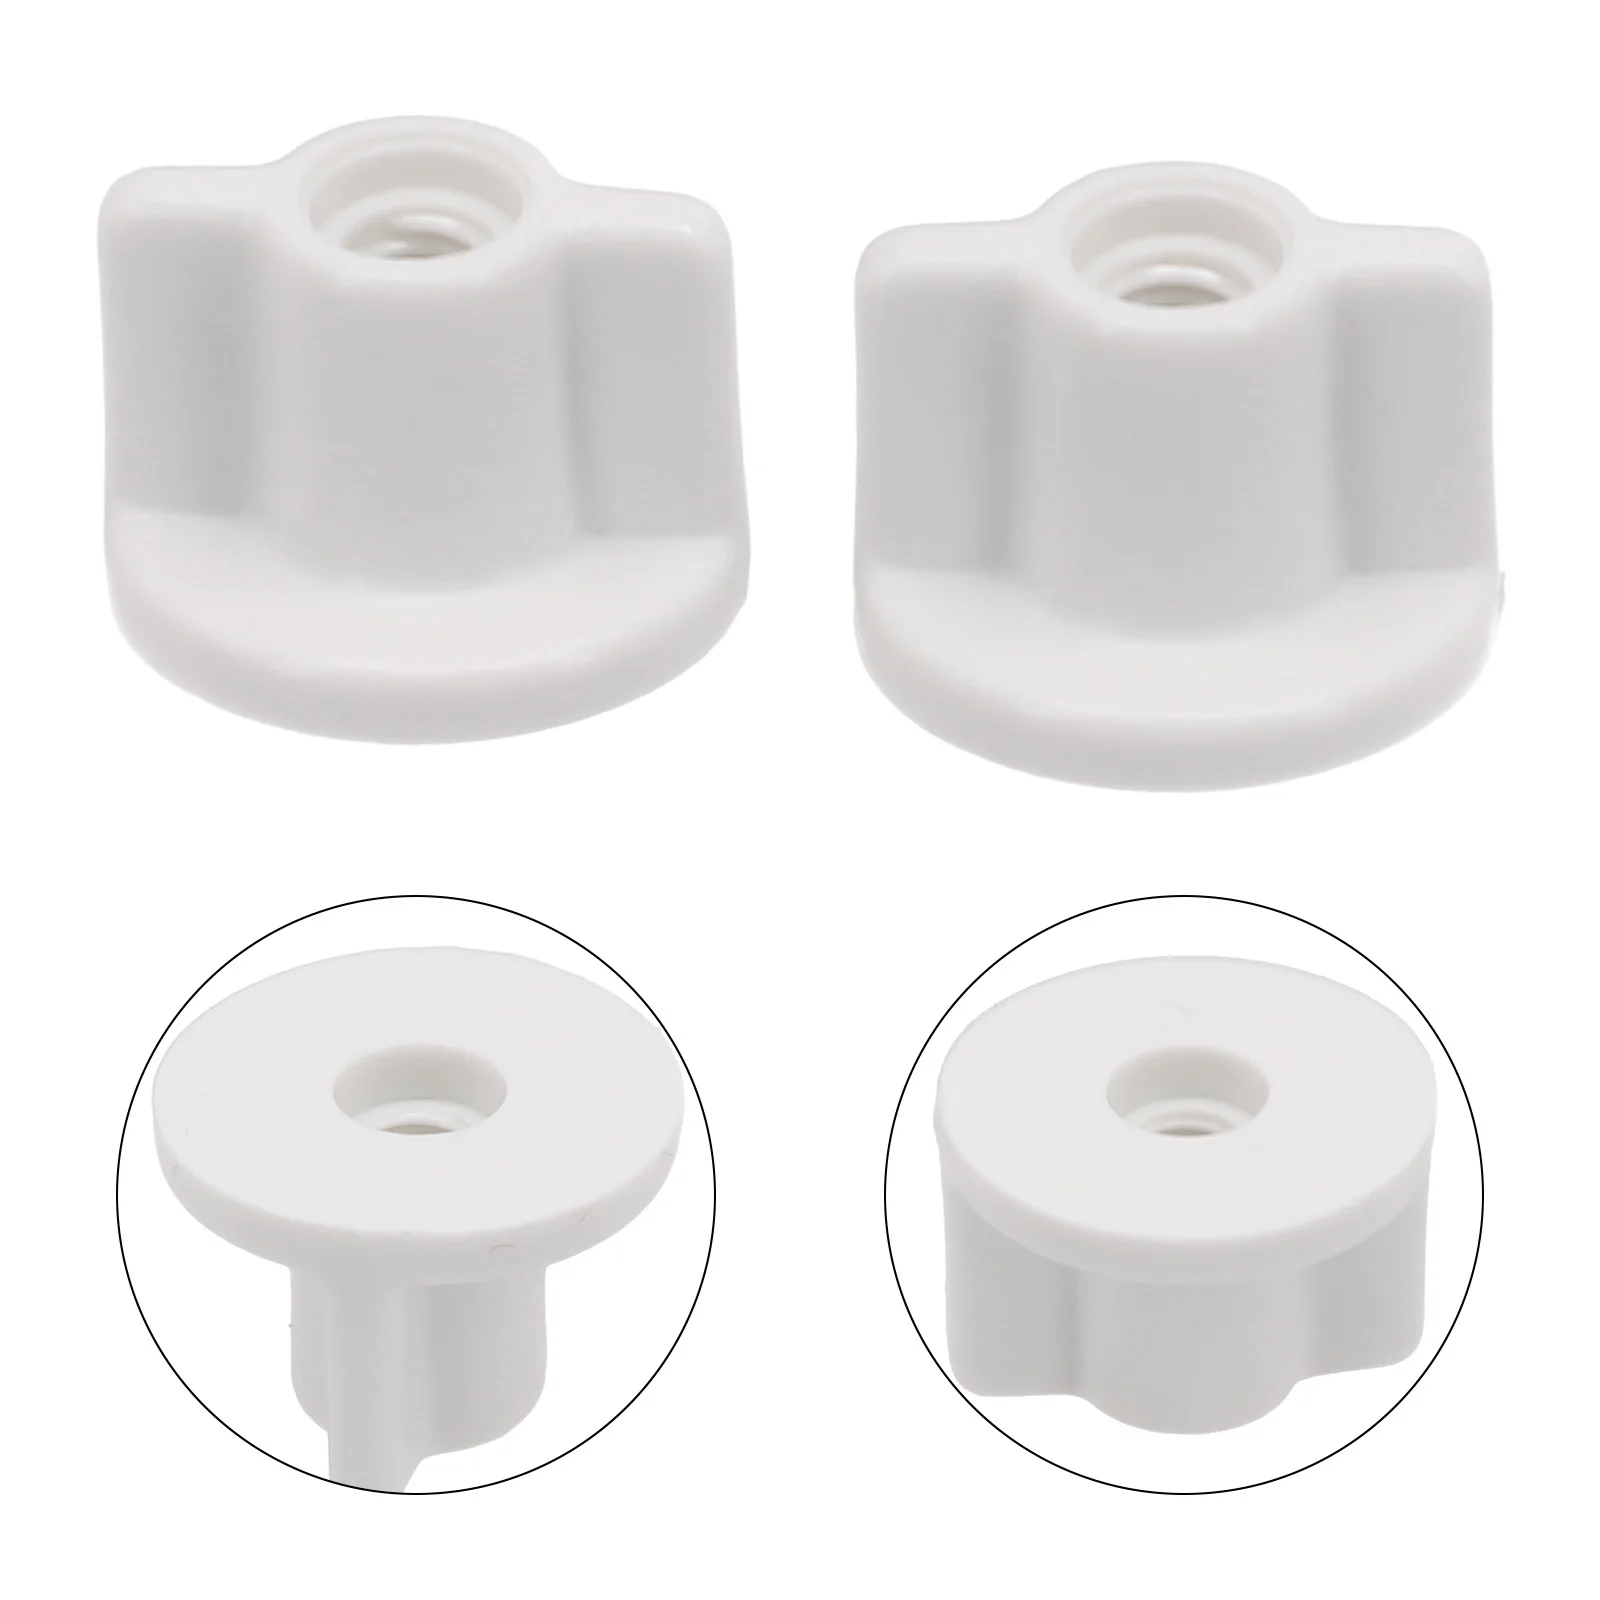 

Fixed Replacement Rear Nut 2.5cm 2PCS 6MM Back Nut Fixed Replacement For 6mm Screws Plastic Screw None Practical